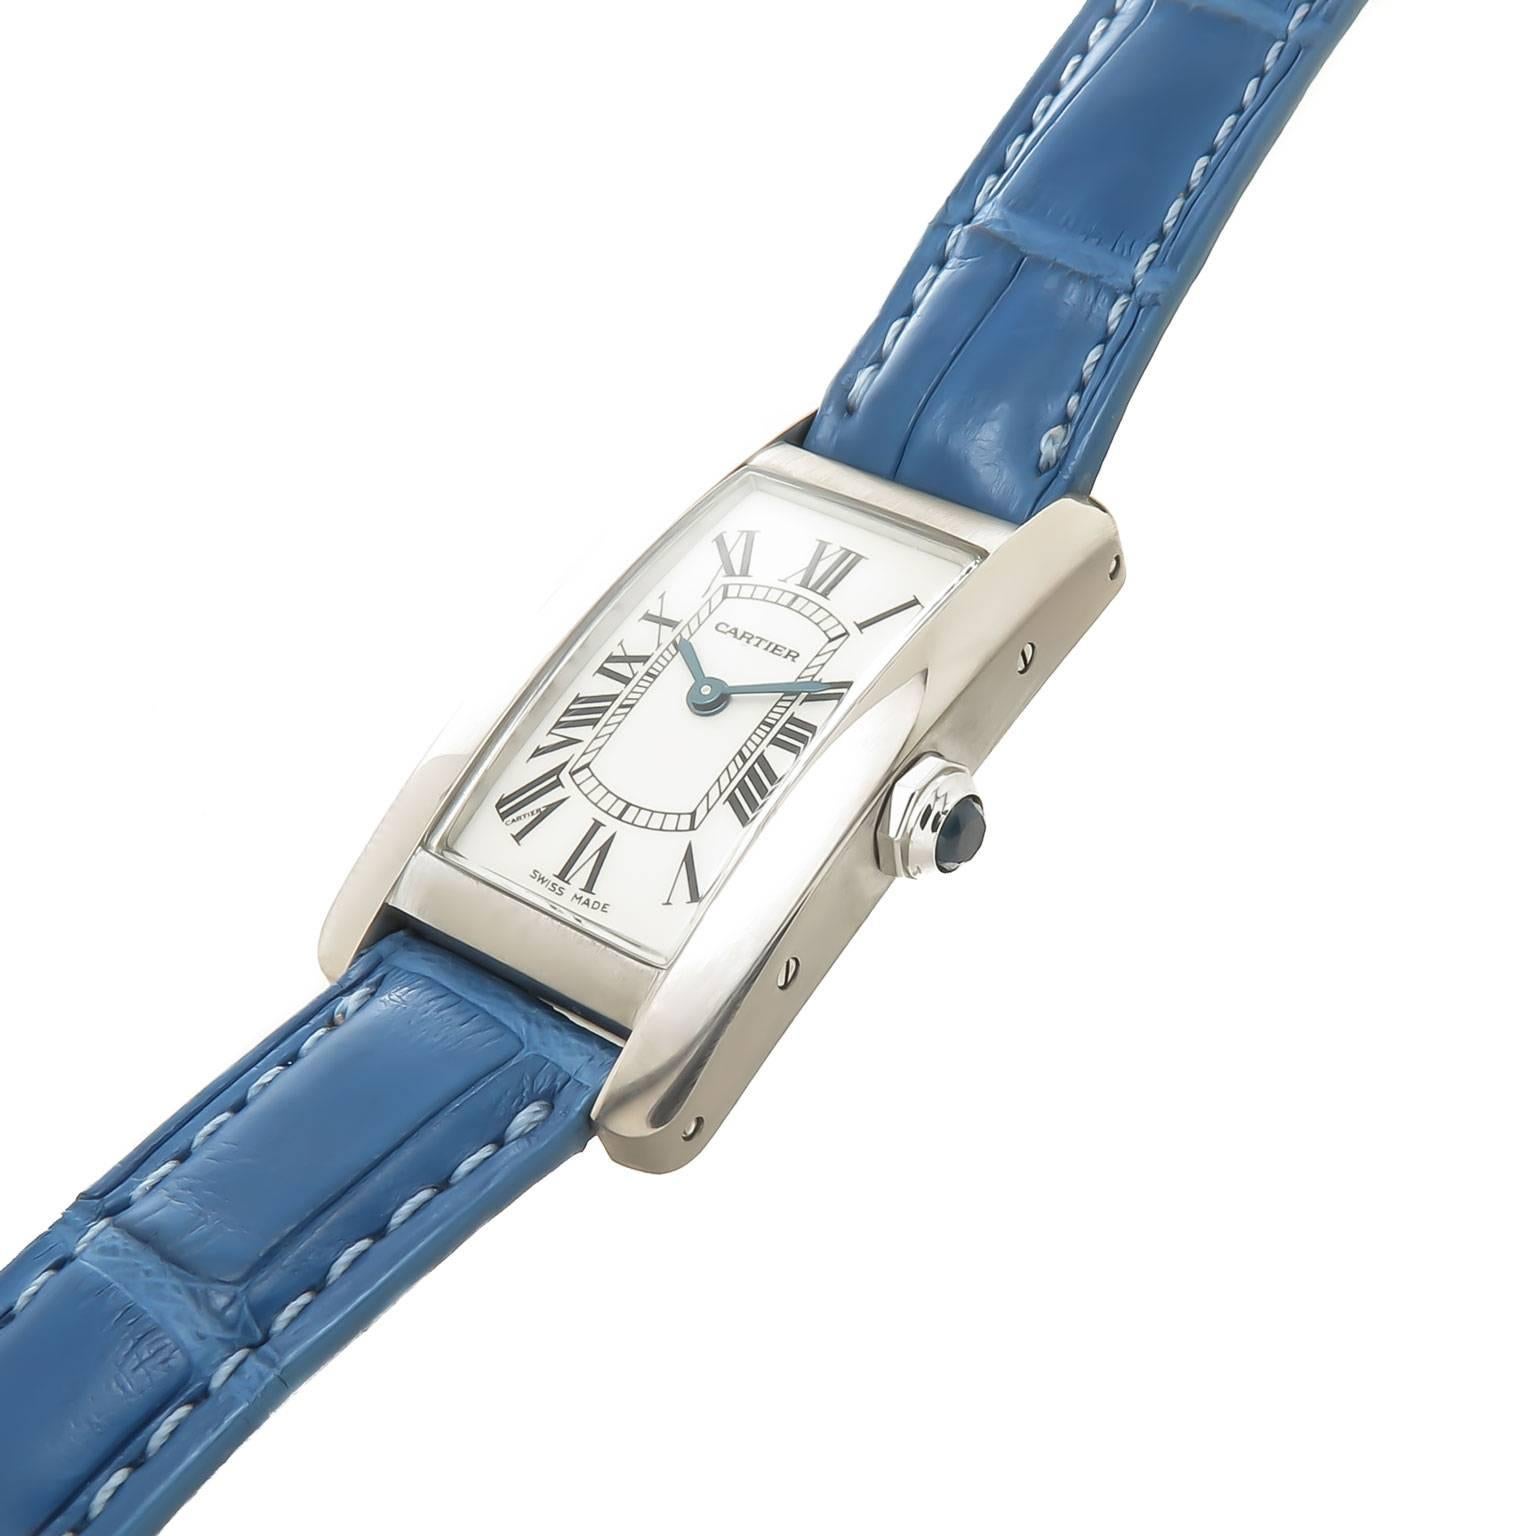 Circa 2000 Cartier Ladies 18K White Gold Tank American Wrist watch. 35 X 19 MM Water Resistant Case, Quartz Movement, Silvered Dial with Black Roman Numerals and a sapphire Crown. Original Cartier Blue Textured Strap with original Cartier 18K